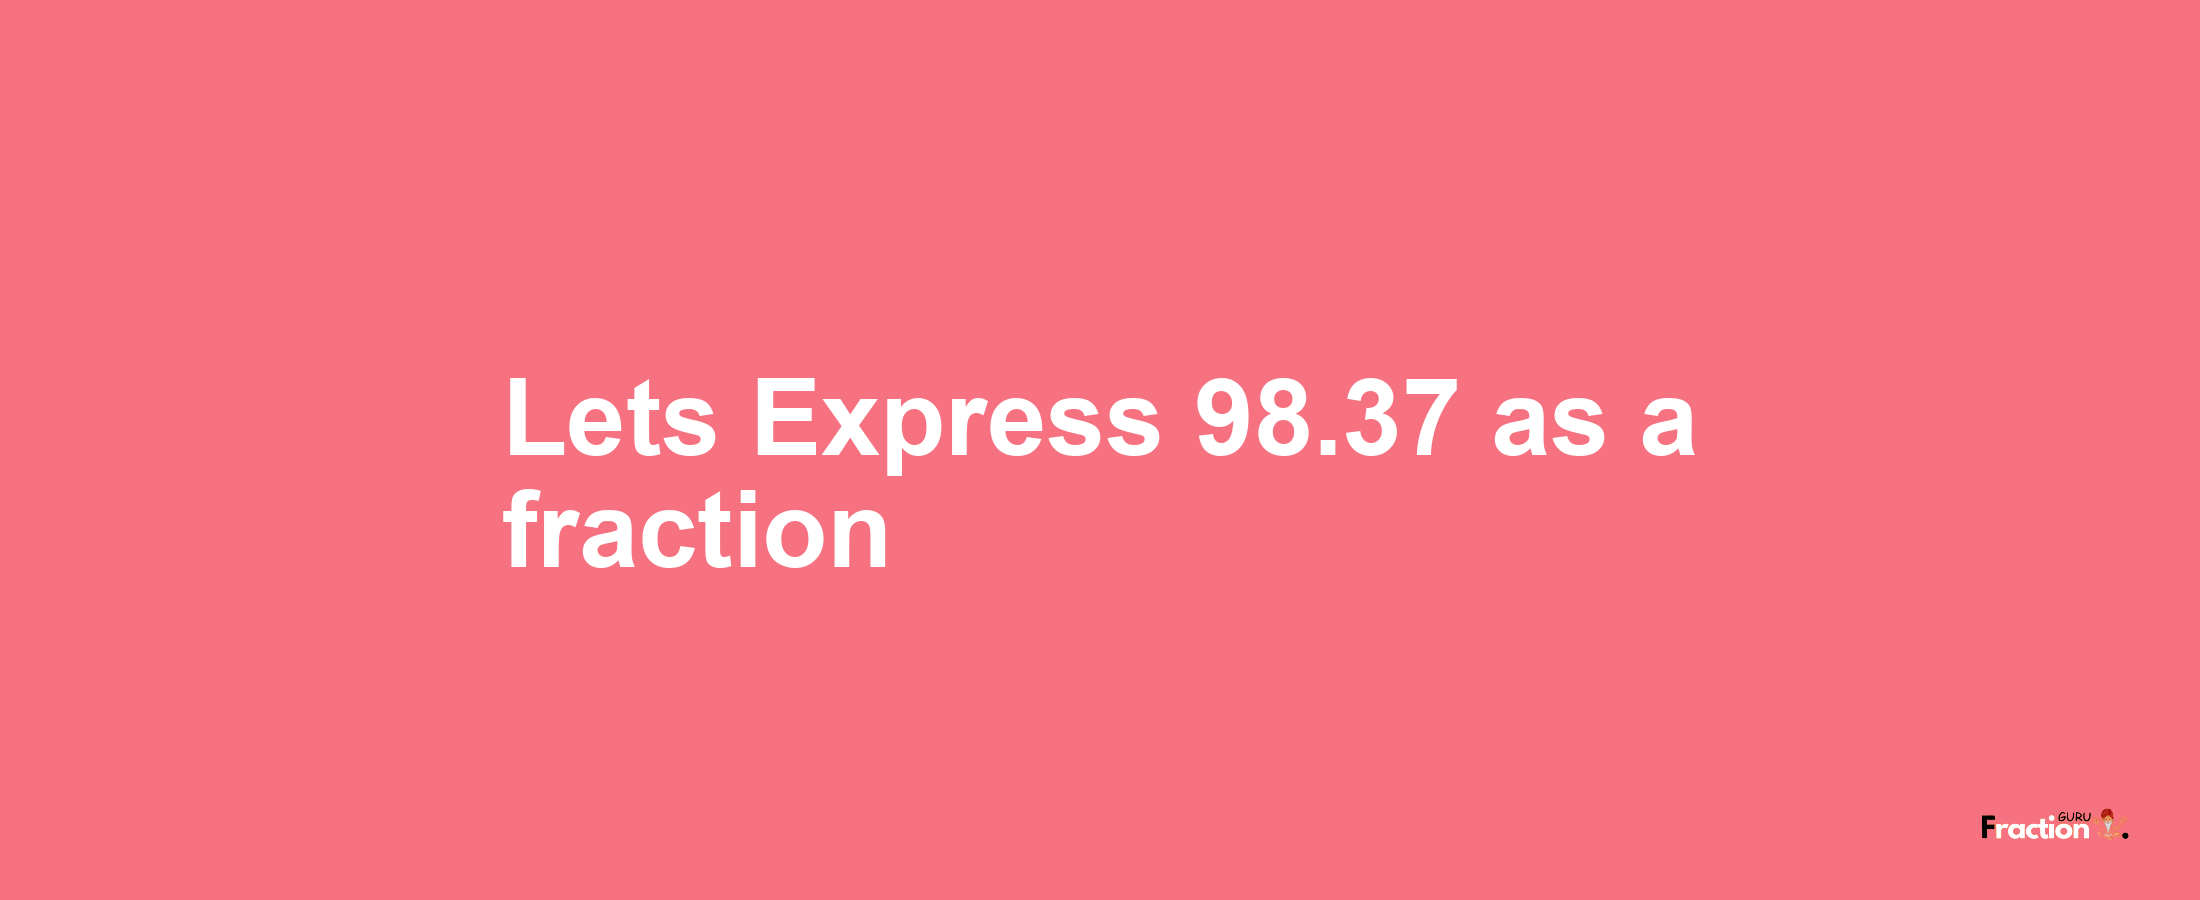 Lets Express 98.37 as afraction